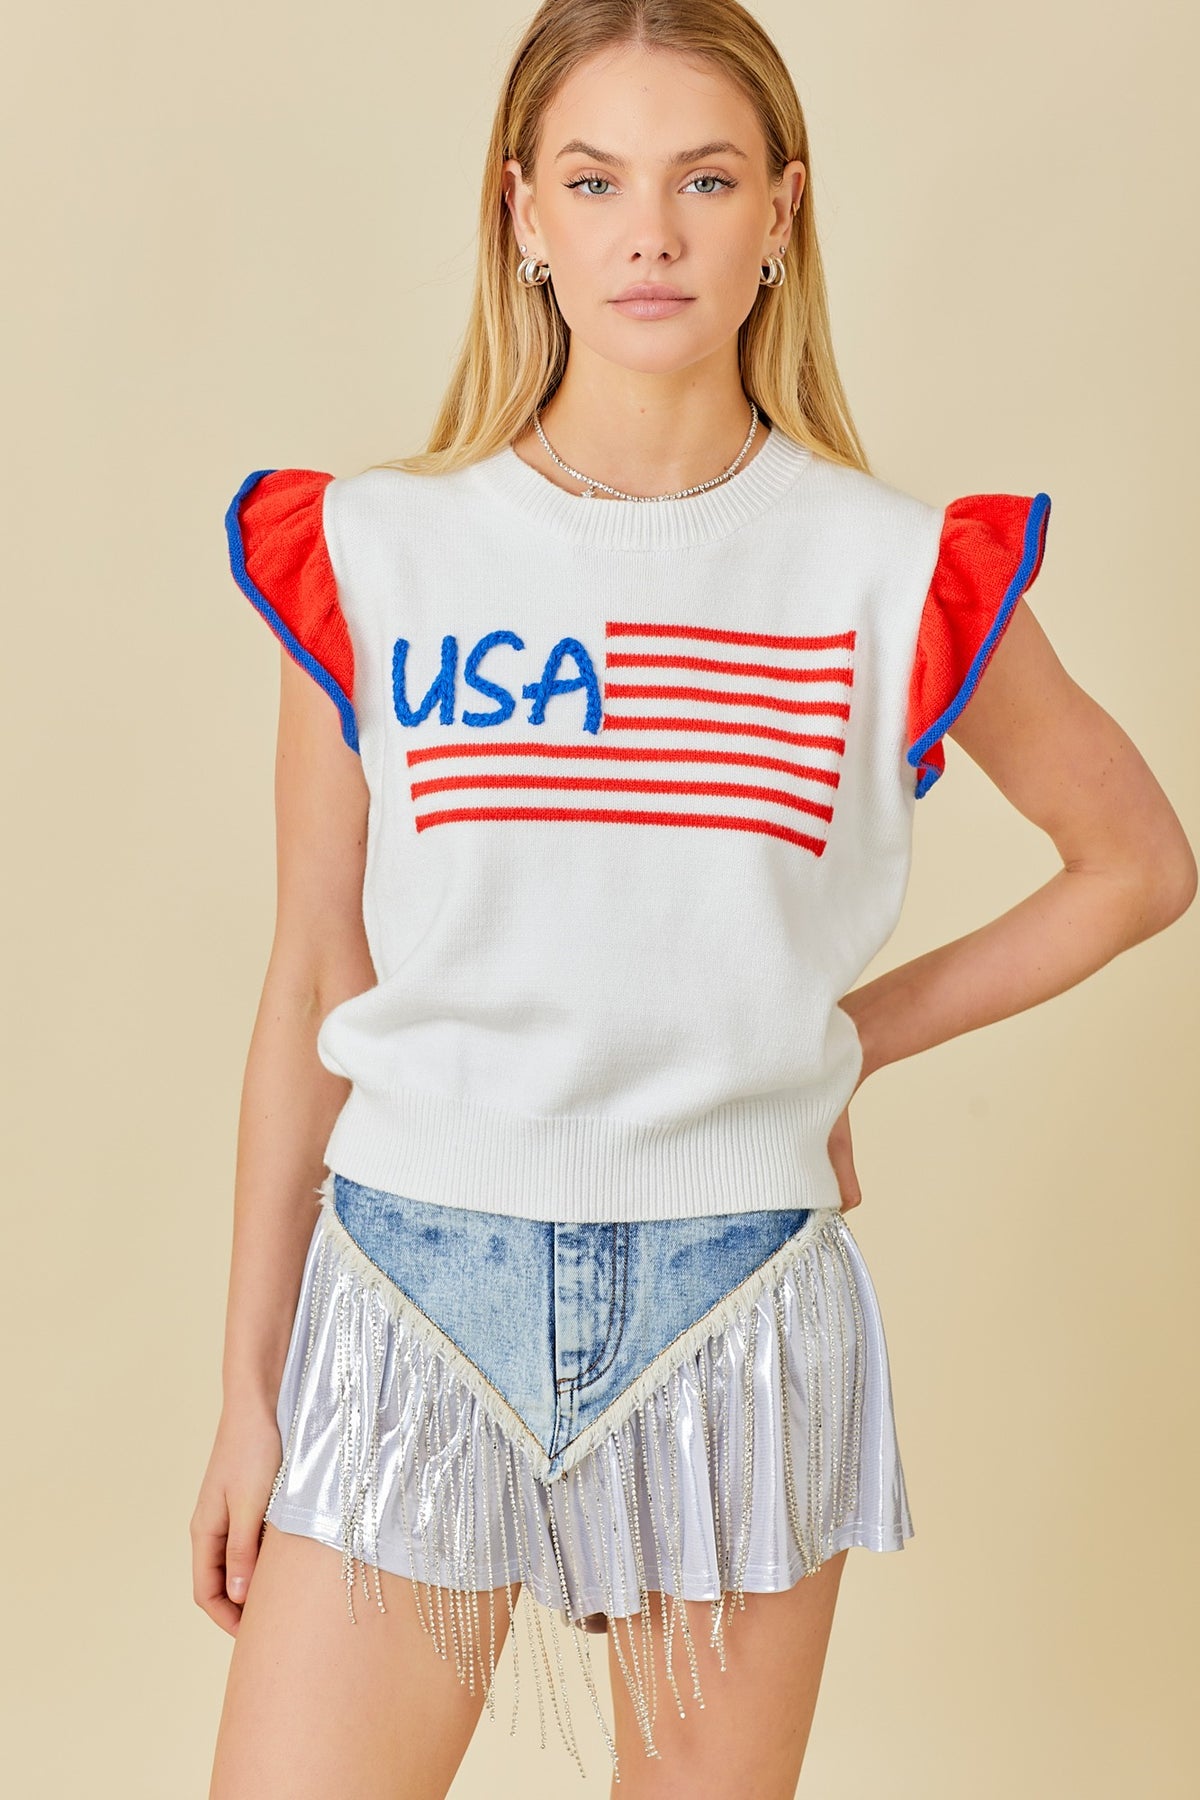 USA Embroidered Sweater